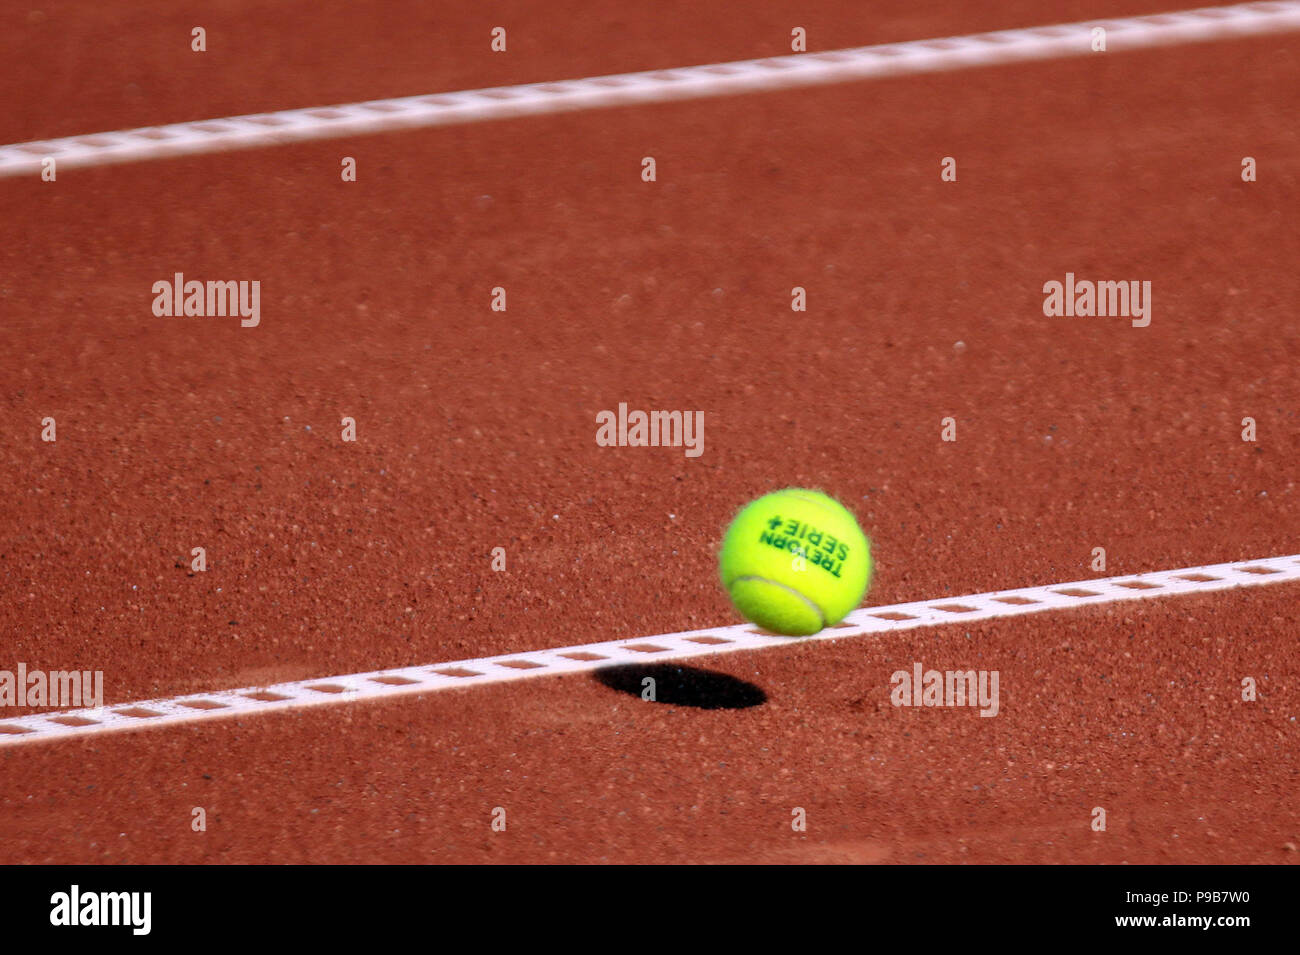 Umag, Croatia. July 17, 2018. CROATIA, Umag: A tennis ball during the singles match Marterer v Serdarusic at the ATP 29th Plava laguna Croatia Open Umag tournament at the at the Goran Ivanisevic ATP Stadium, on July 17, 2018 in Umag. Credit: Andrea Spinelli/Alamy Live News Stock Photo